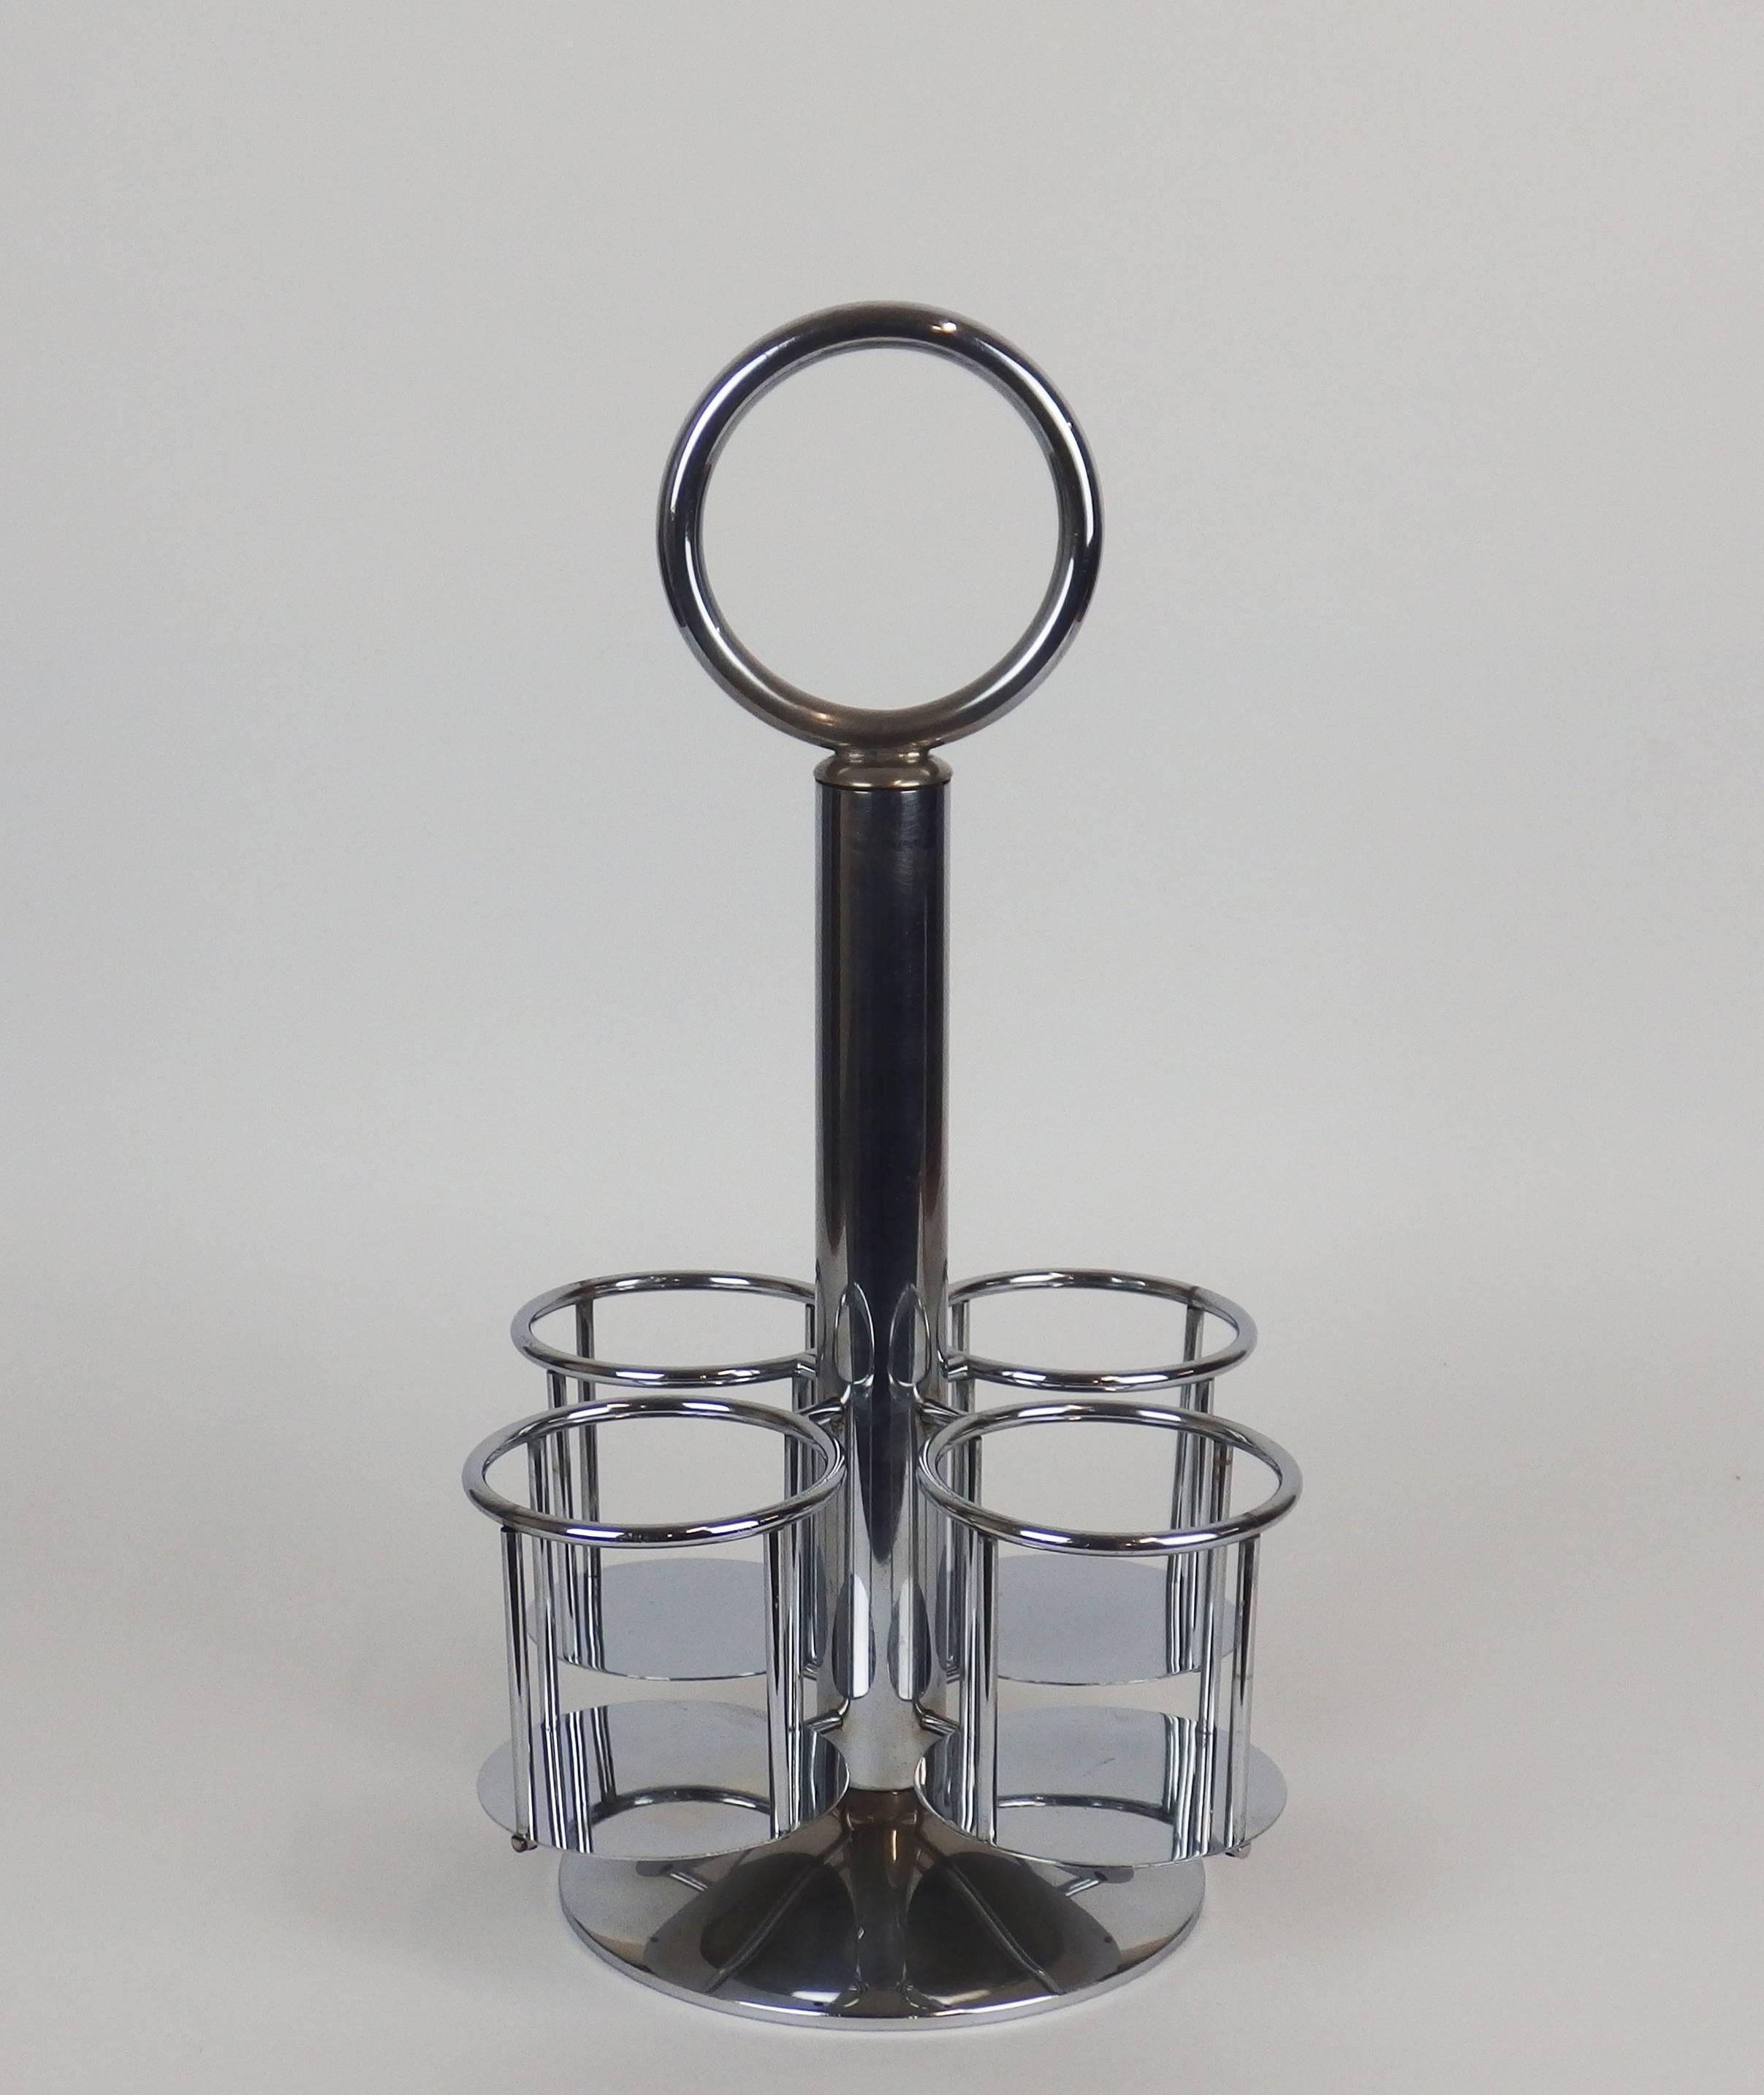 French Art Deco Modernist Bottle Holder in the Style of Jacques Adnet For Sale